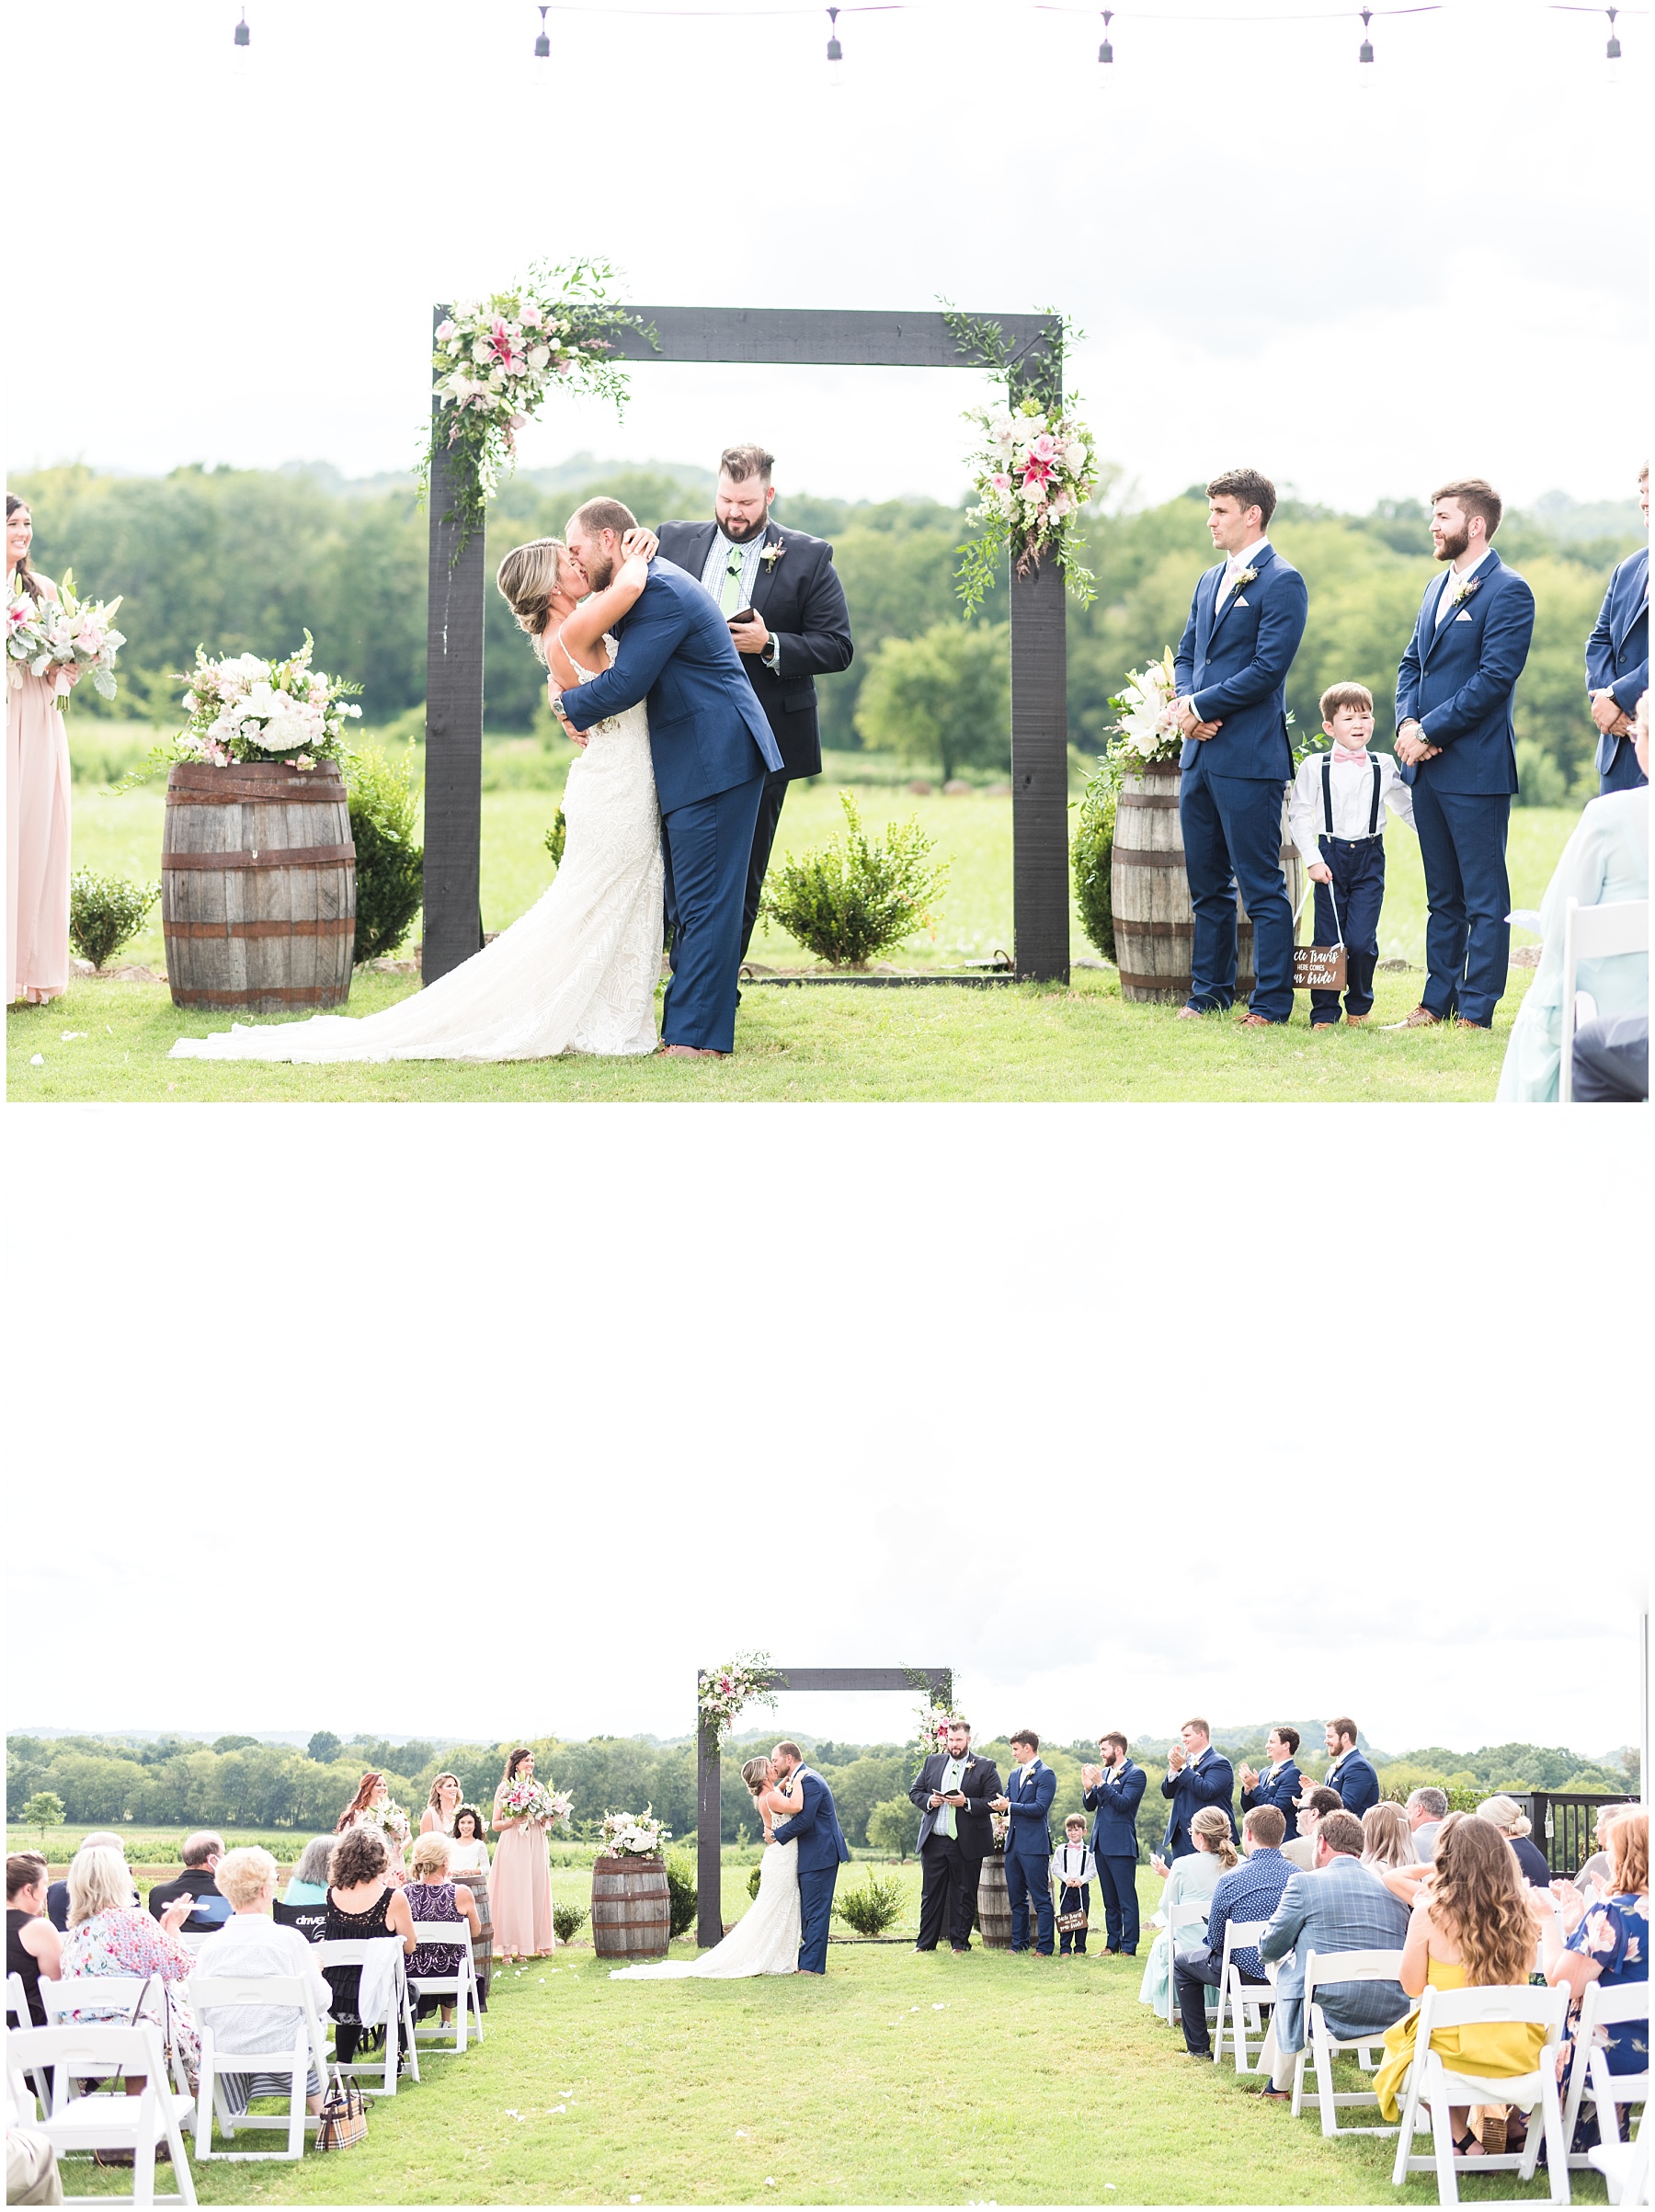 Blush and Navy wedding caremony at Allenbrooke Farms in Spring Hill